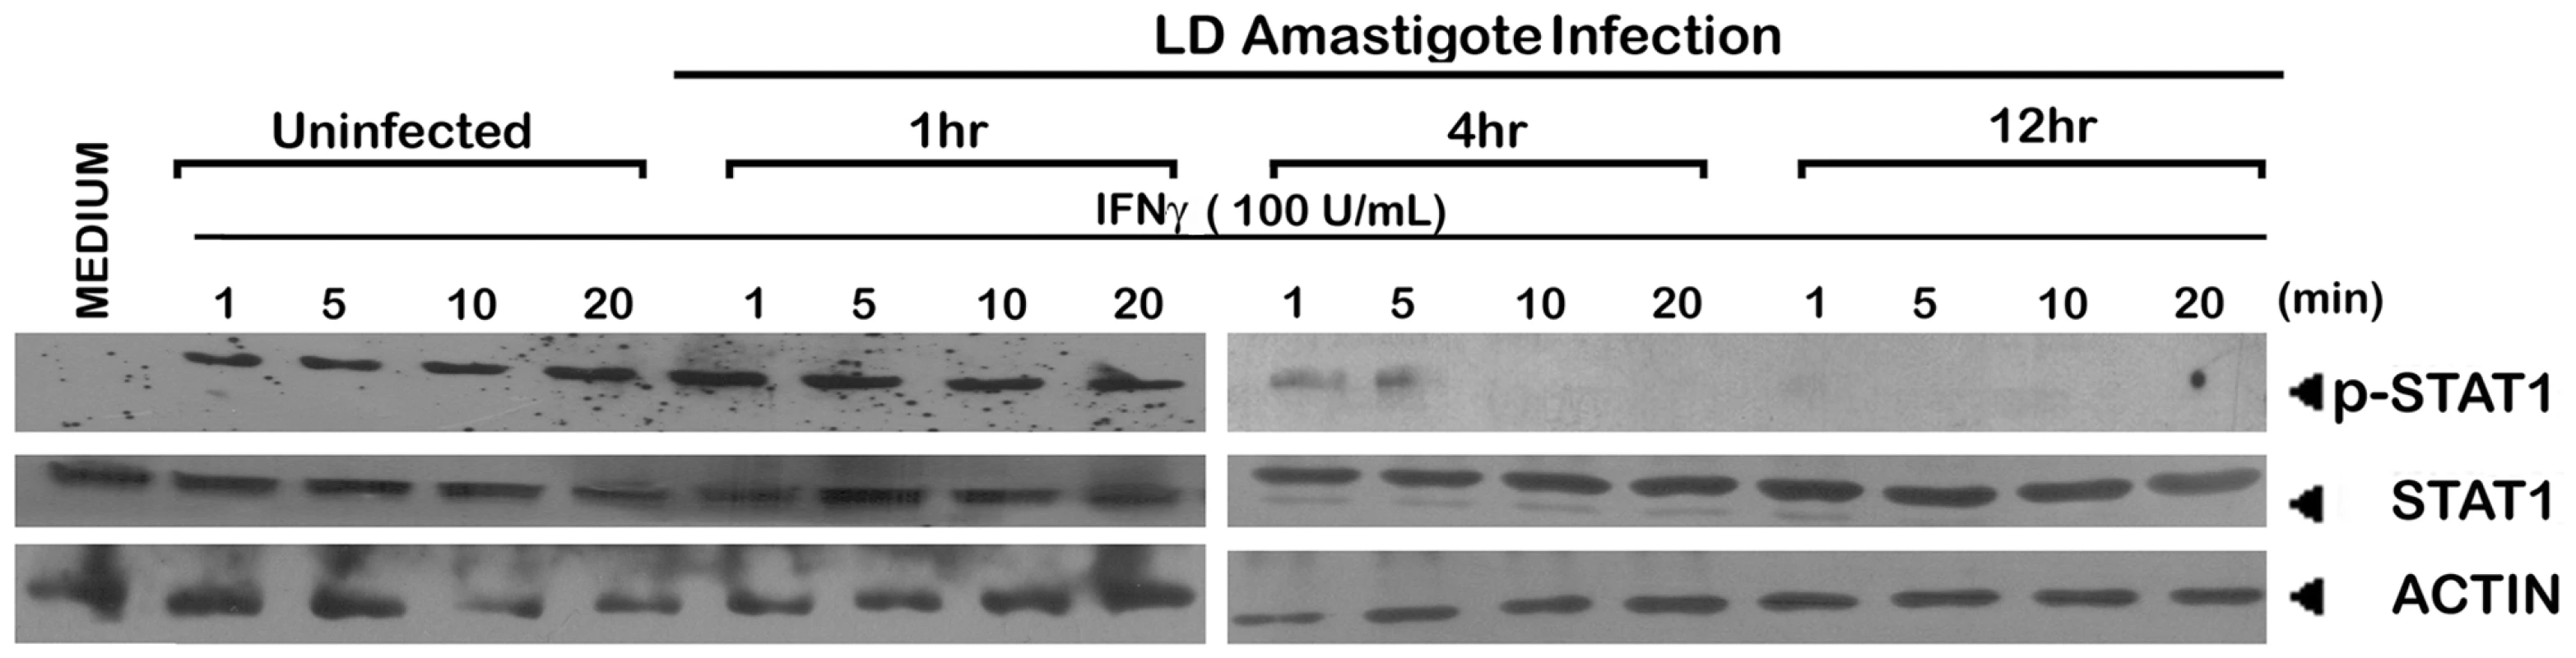 Suppression of IFNγ signaling initiation in LD amastigote infected MØs.